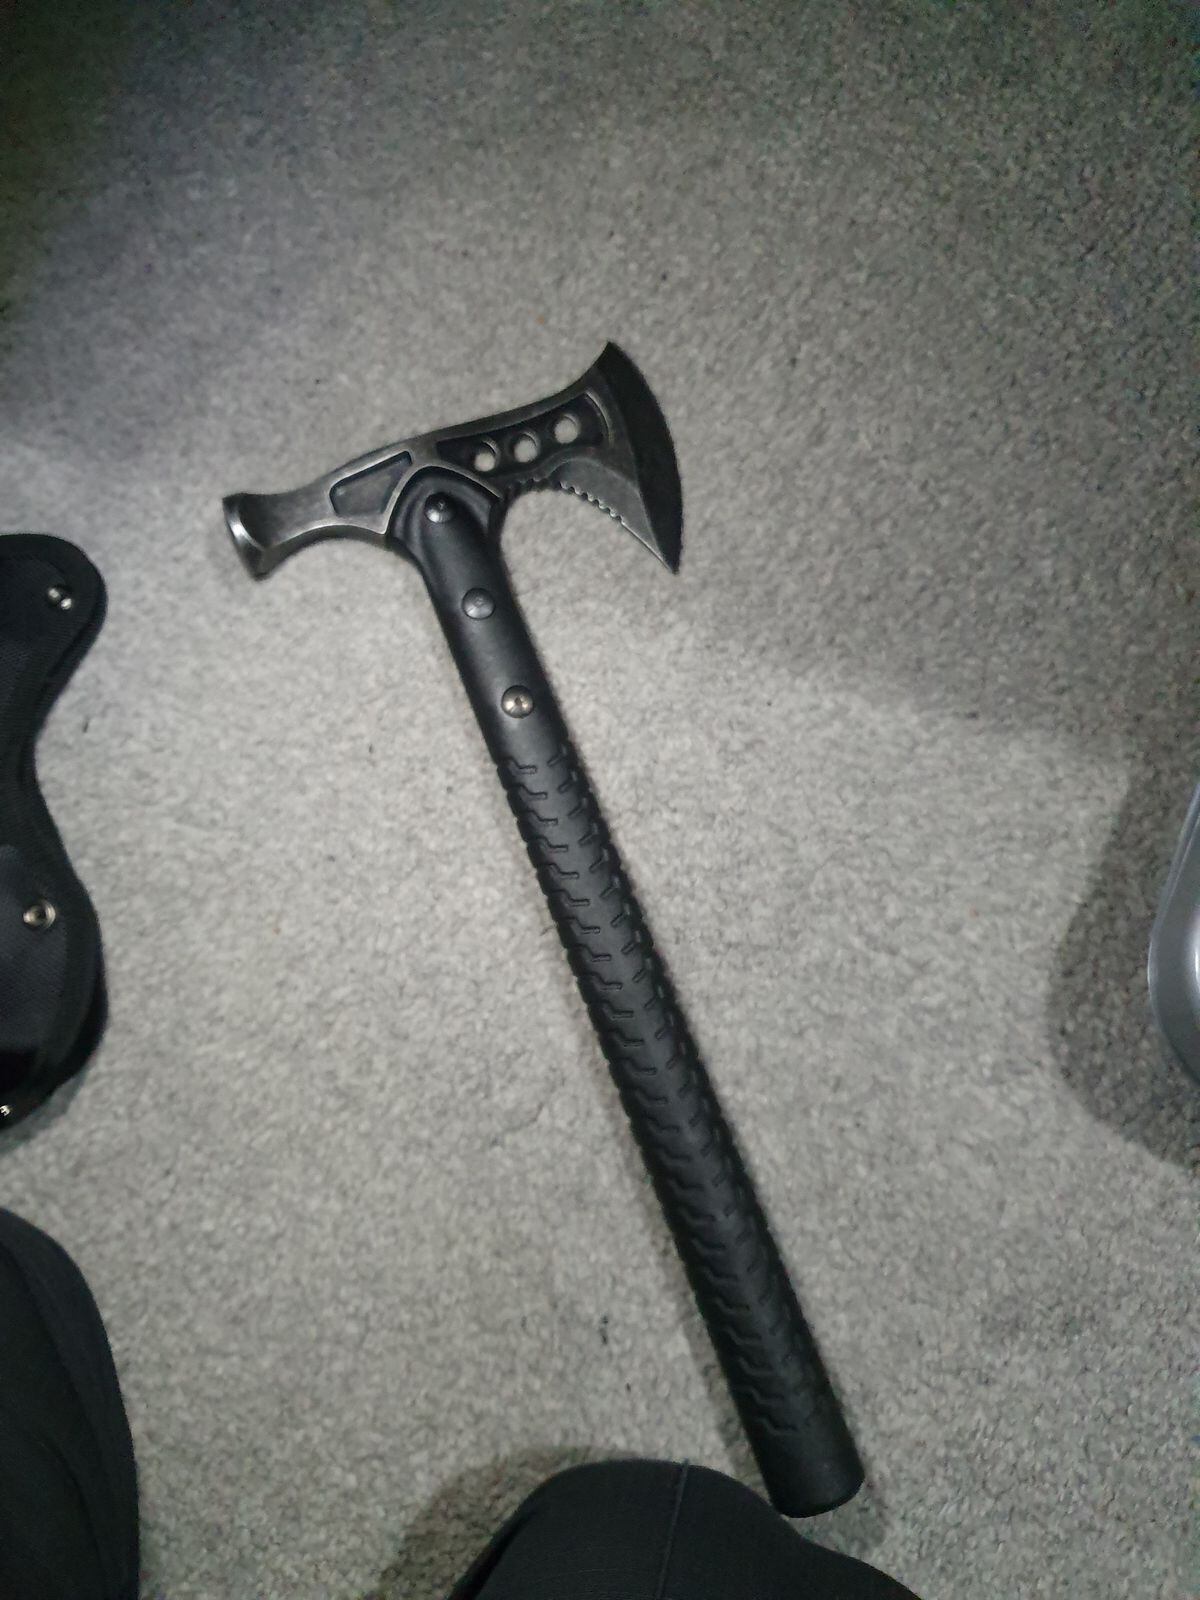 This pick axe is off the streets now